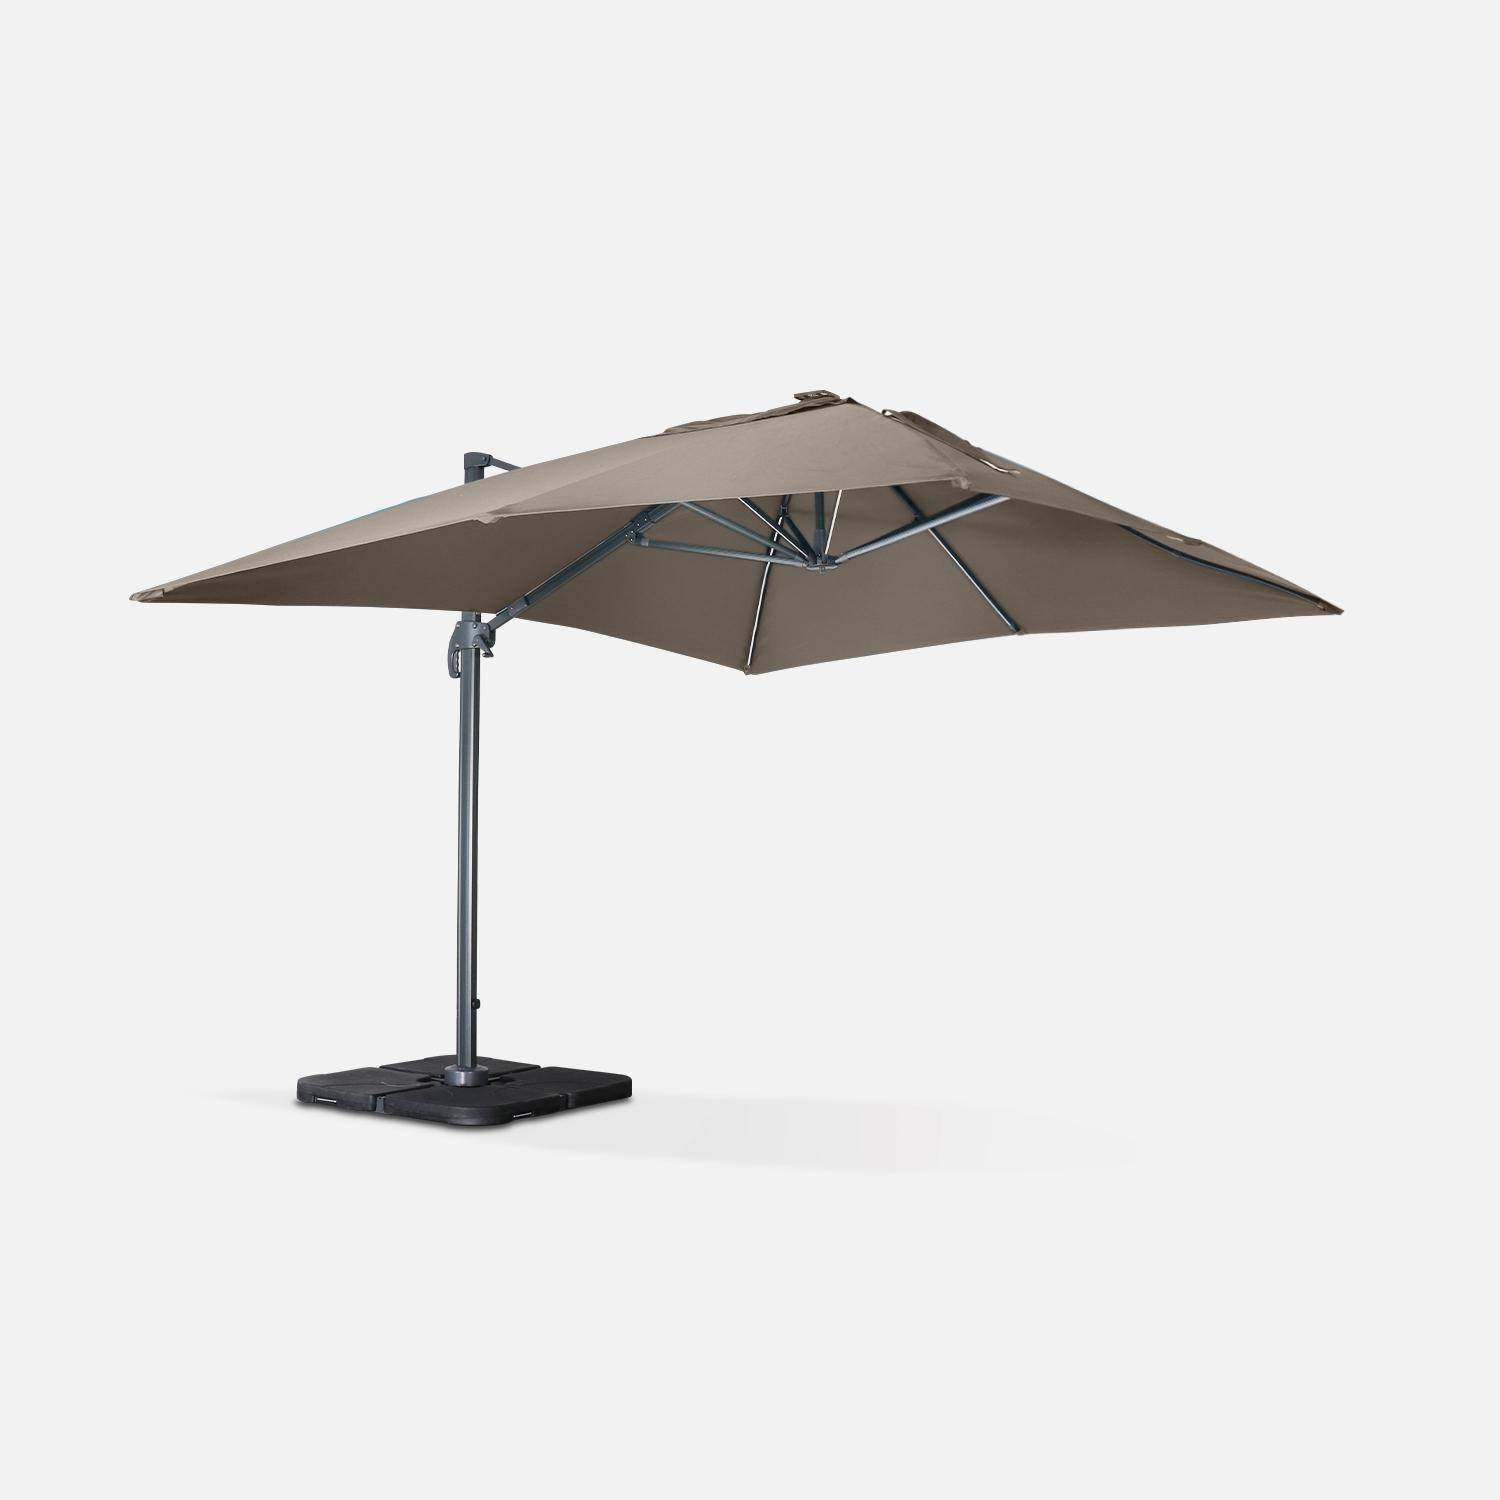 Premium quality rectangular 3x4m cantilever parasol with solar-powered integrated LED lights, tiltable, foldable , 360° rotation, cover included, beige,sweeek,Photo2